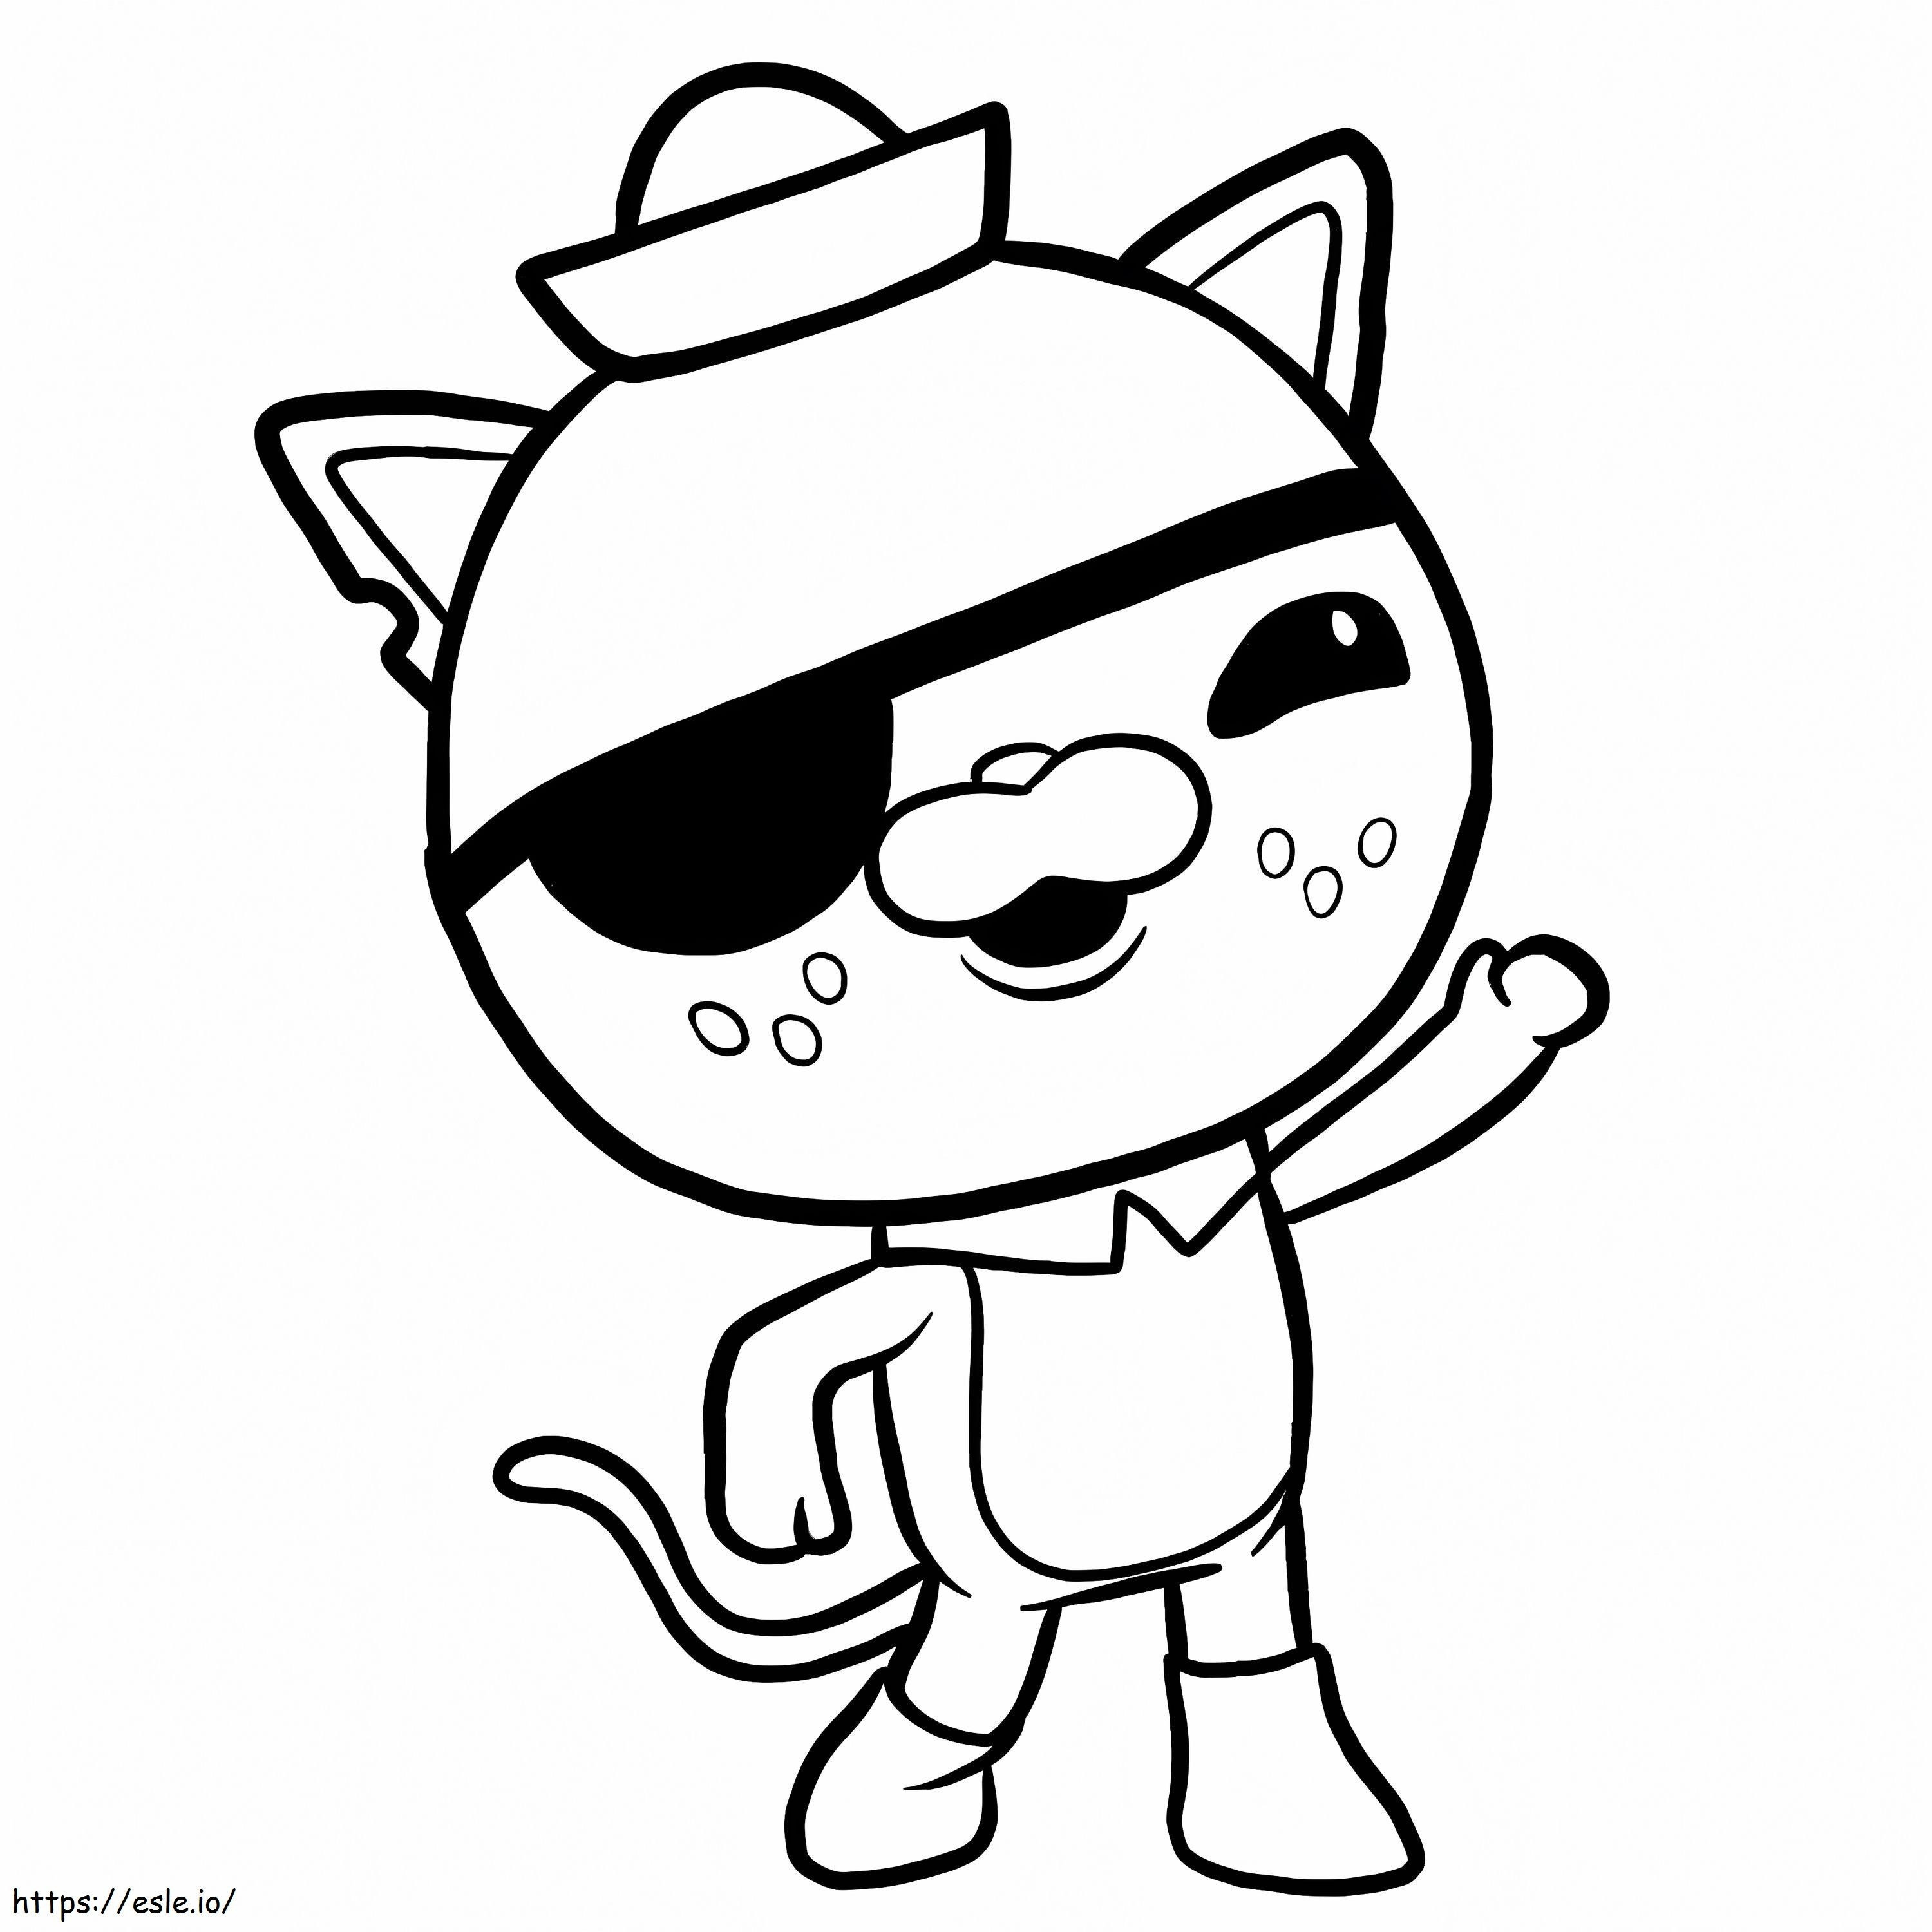 Kwazii Funny coloring page